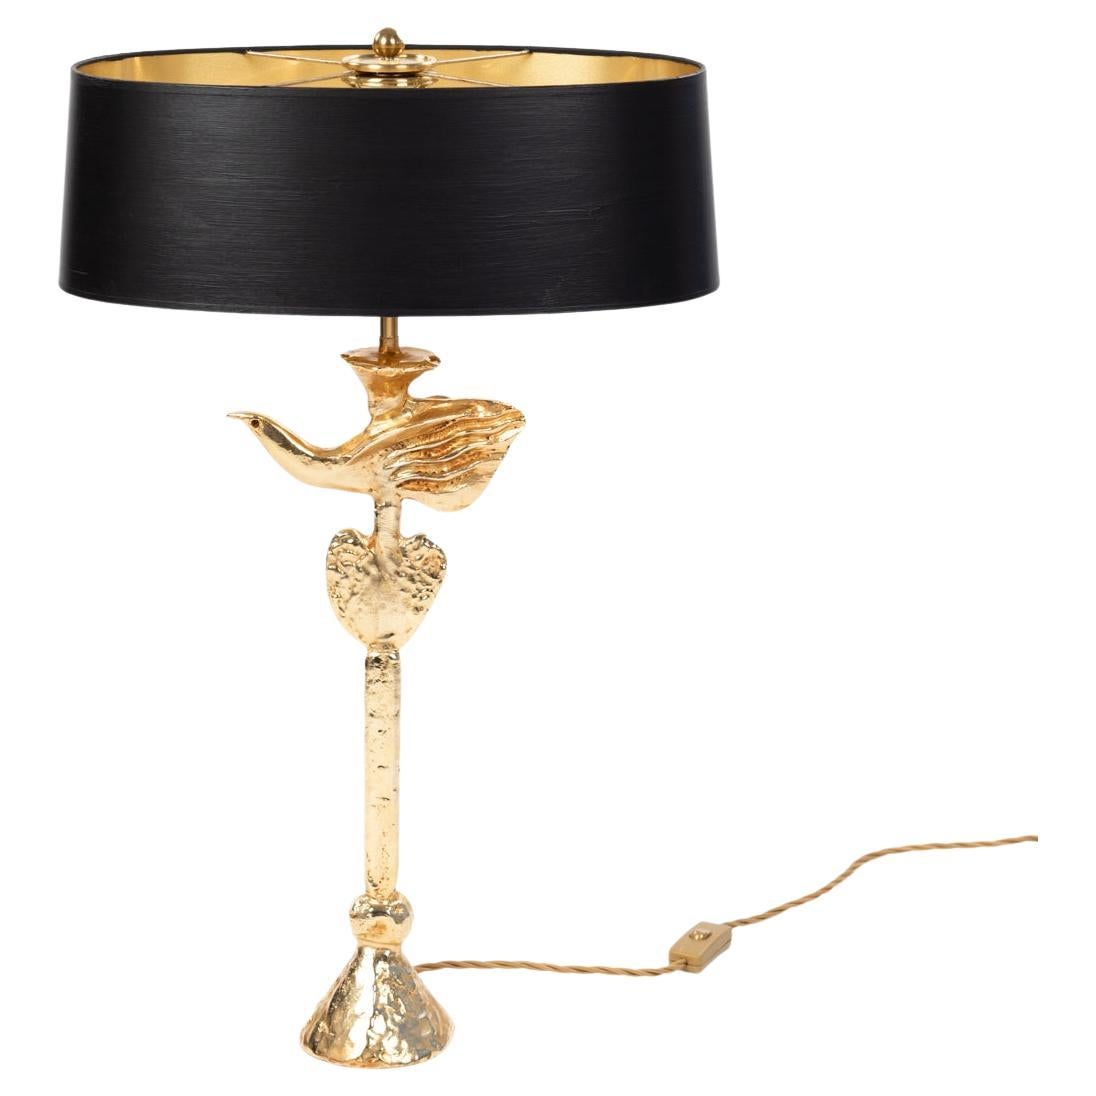 French Gilded Bronze Table Lamp by Pierre Casenove for Fondica, 1980s For Sale